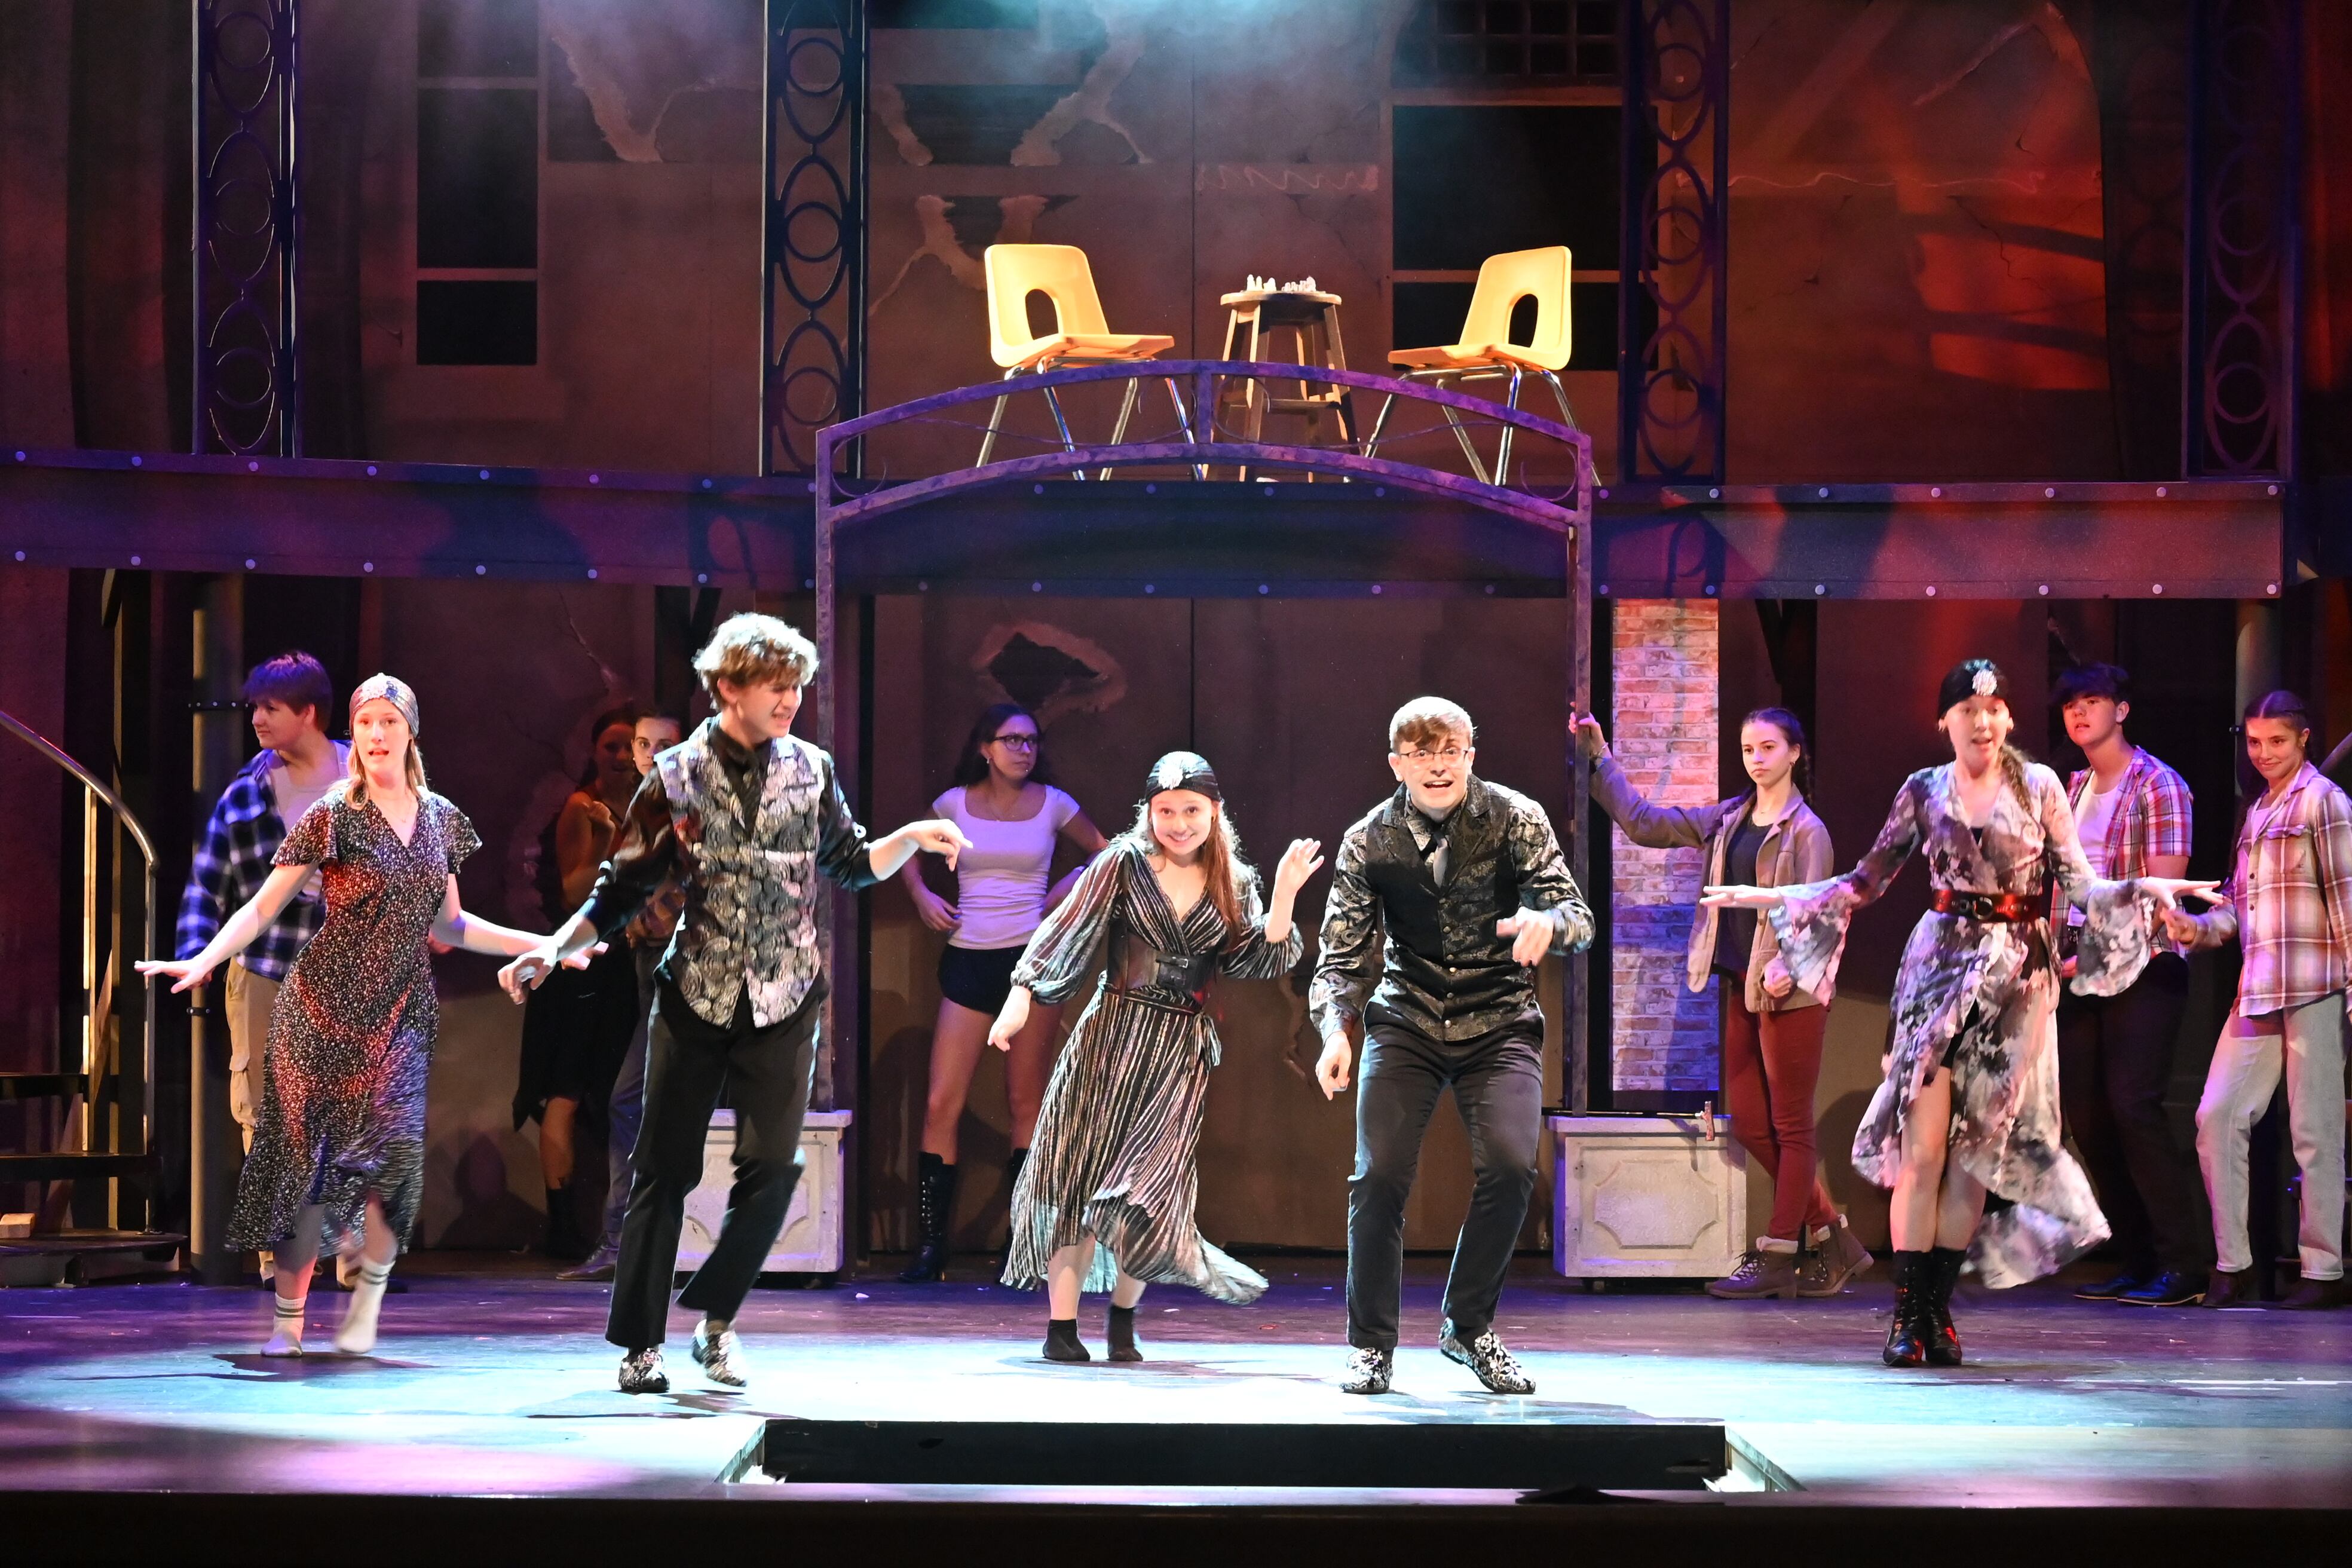 The cast of Hadestown: Teen Edition performance one of the many song-and-dance numbers during the play.